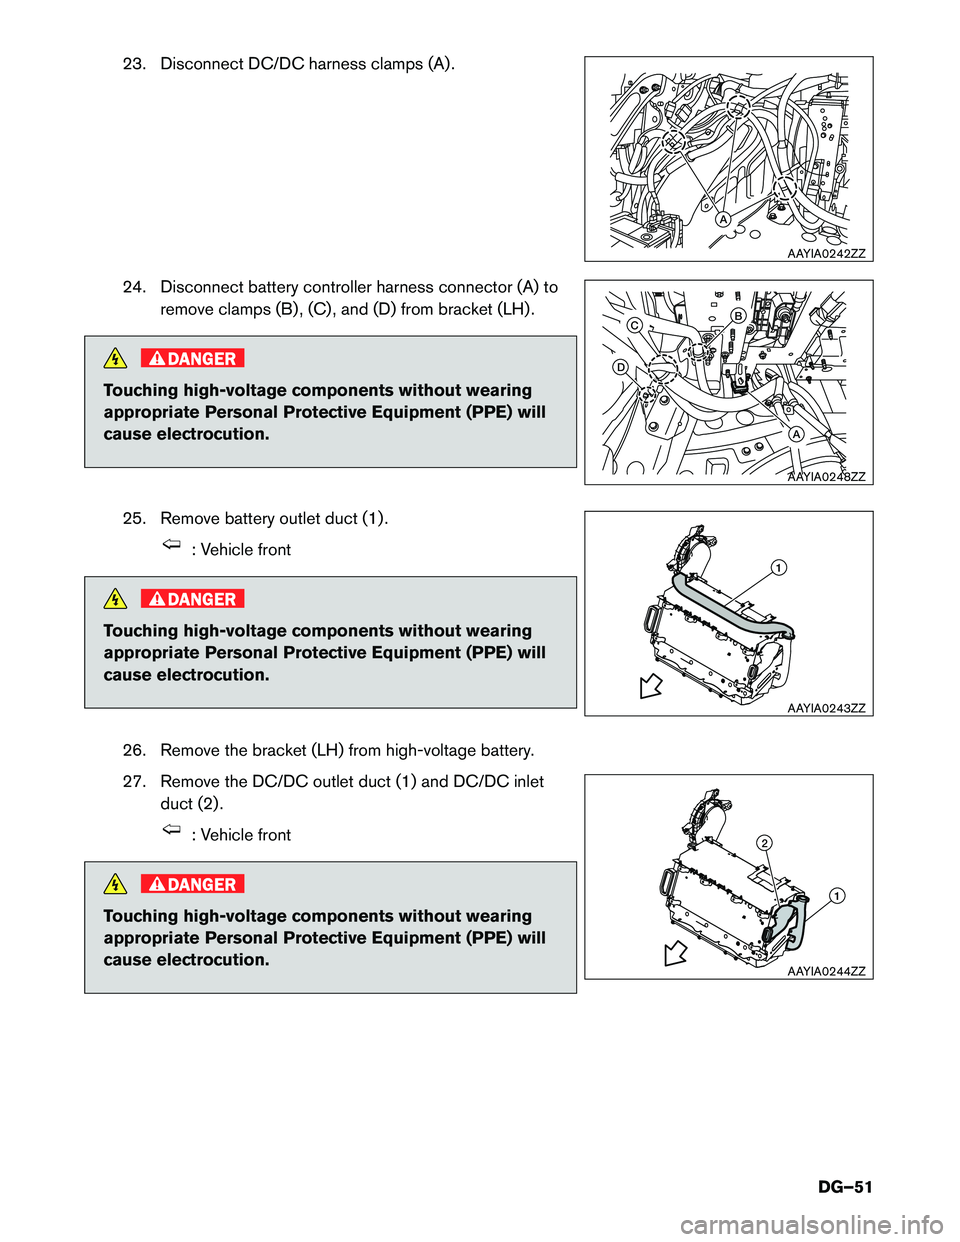 INFINITI Q50 HYBRID 2018  Dismantling Guide 23. Disconnect DC/DC harness clamps (A) .
24.
Disconnect battery controller harness connector (A) to
remove clamps (B) , (C) , and (D) from bracket (LH) . DANGER
Touching high-voltage components witho